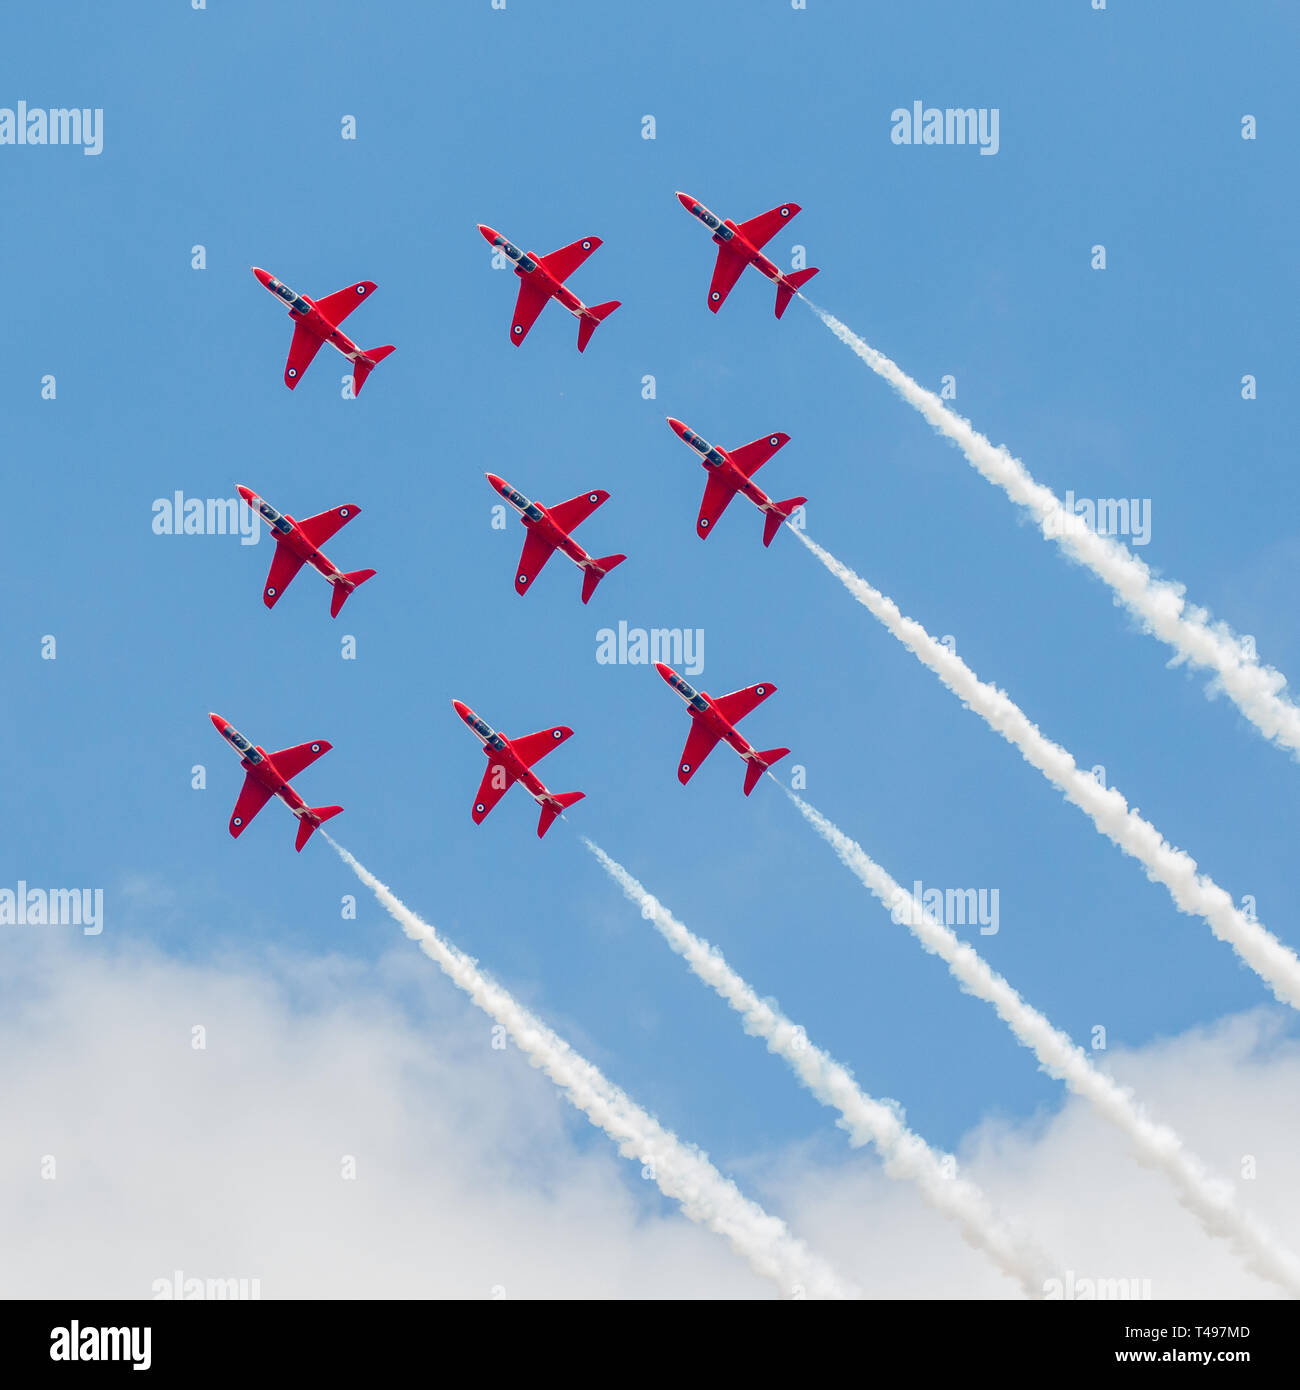 The UK Royal Air Force Aerobatic Display Team - The Red Arrows - during their display routine Stock Photo